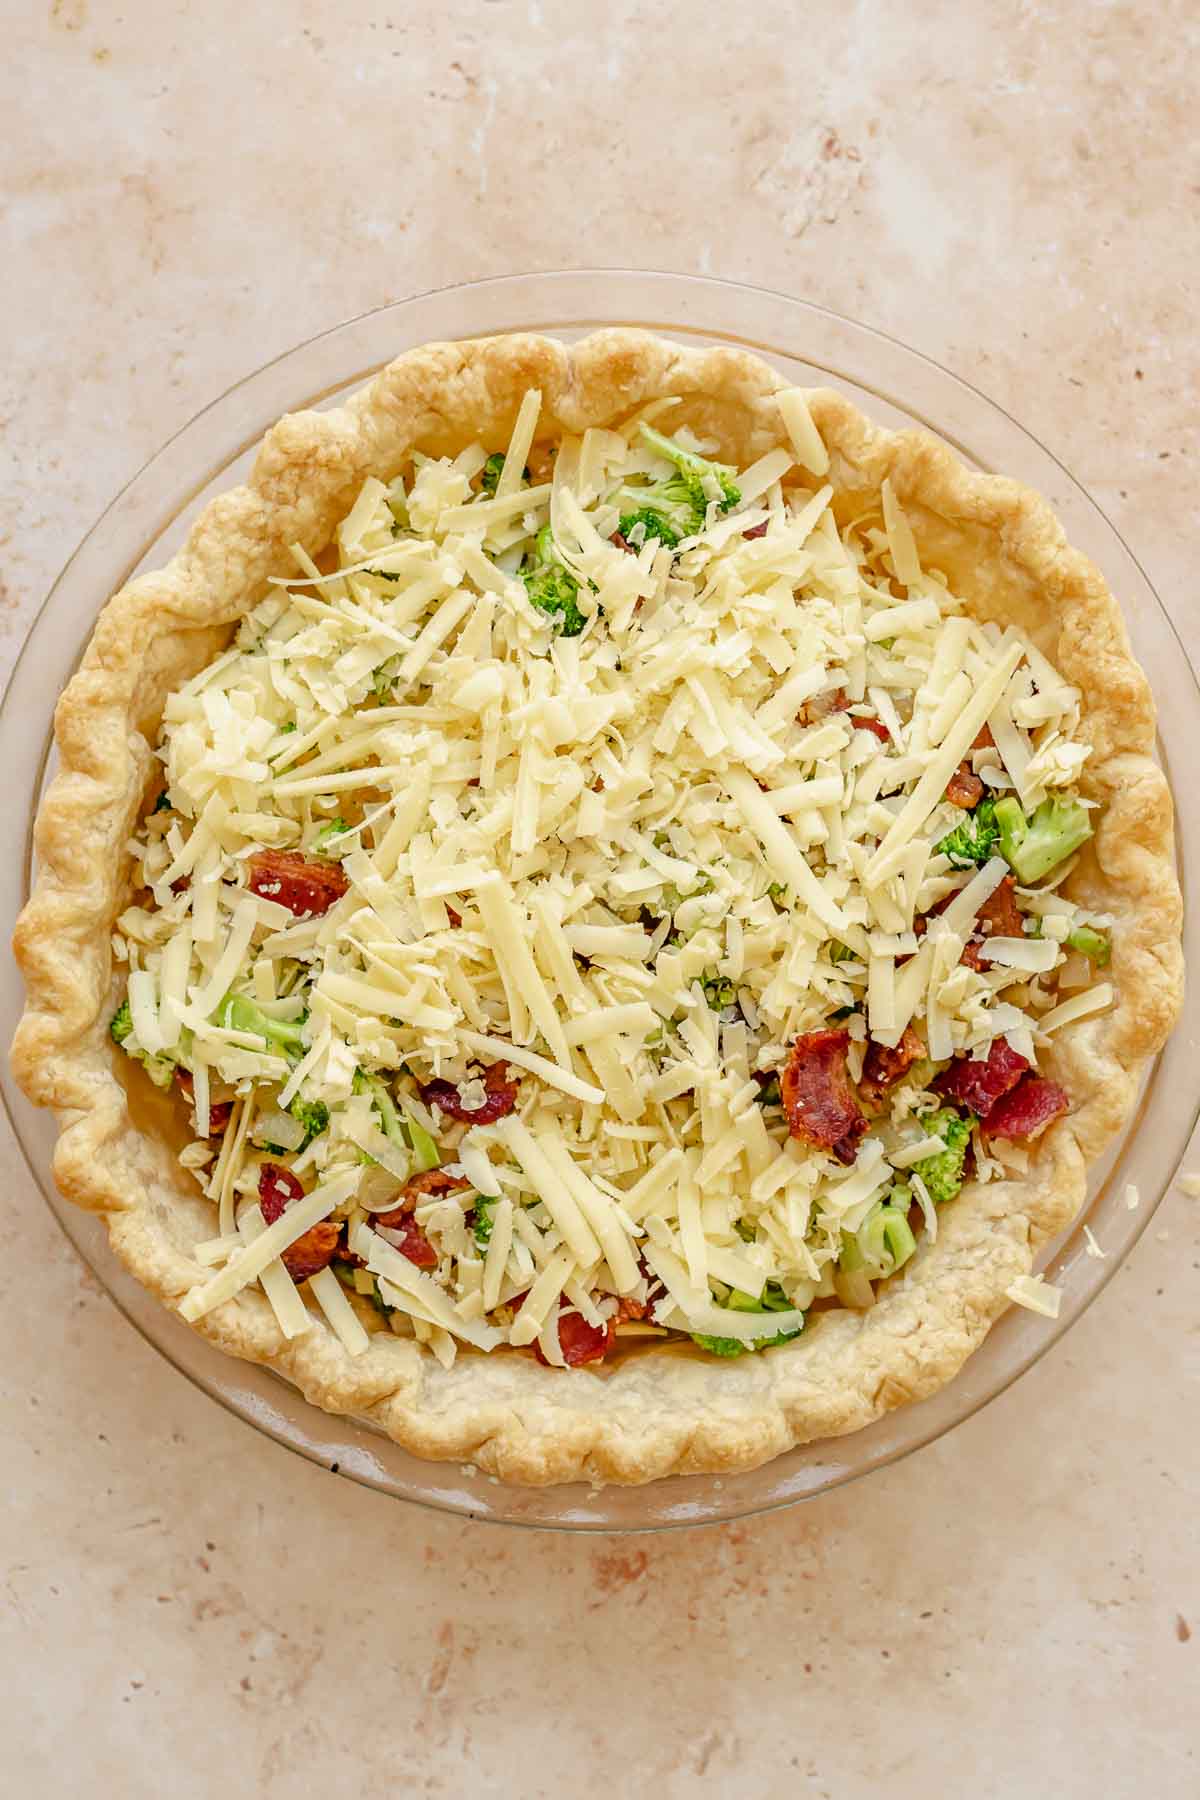 Bacon, broccoli, onion, garlic and cheese in a pie crust.